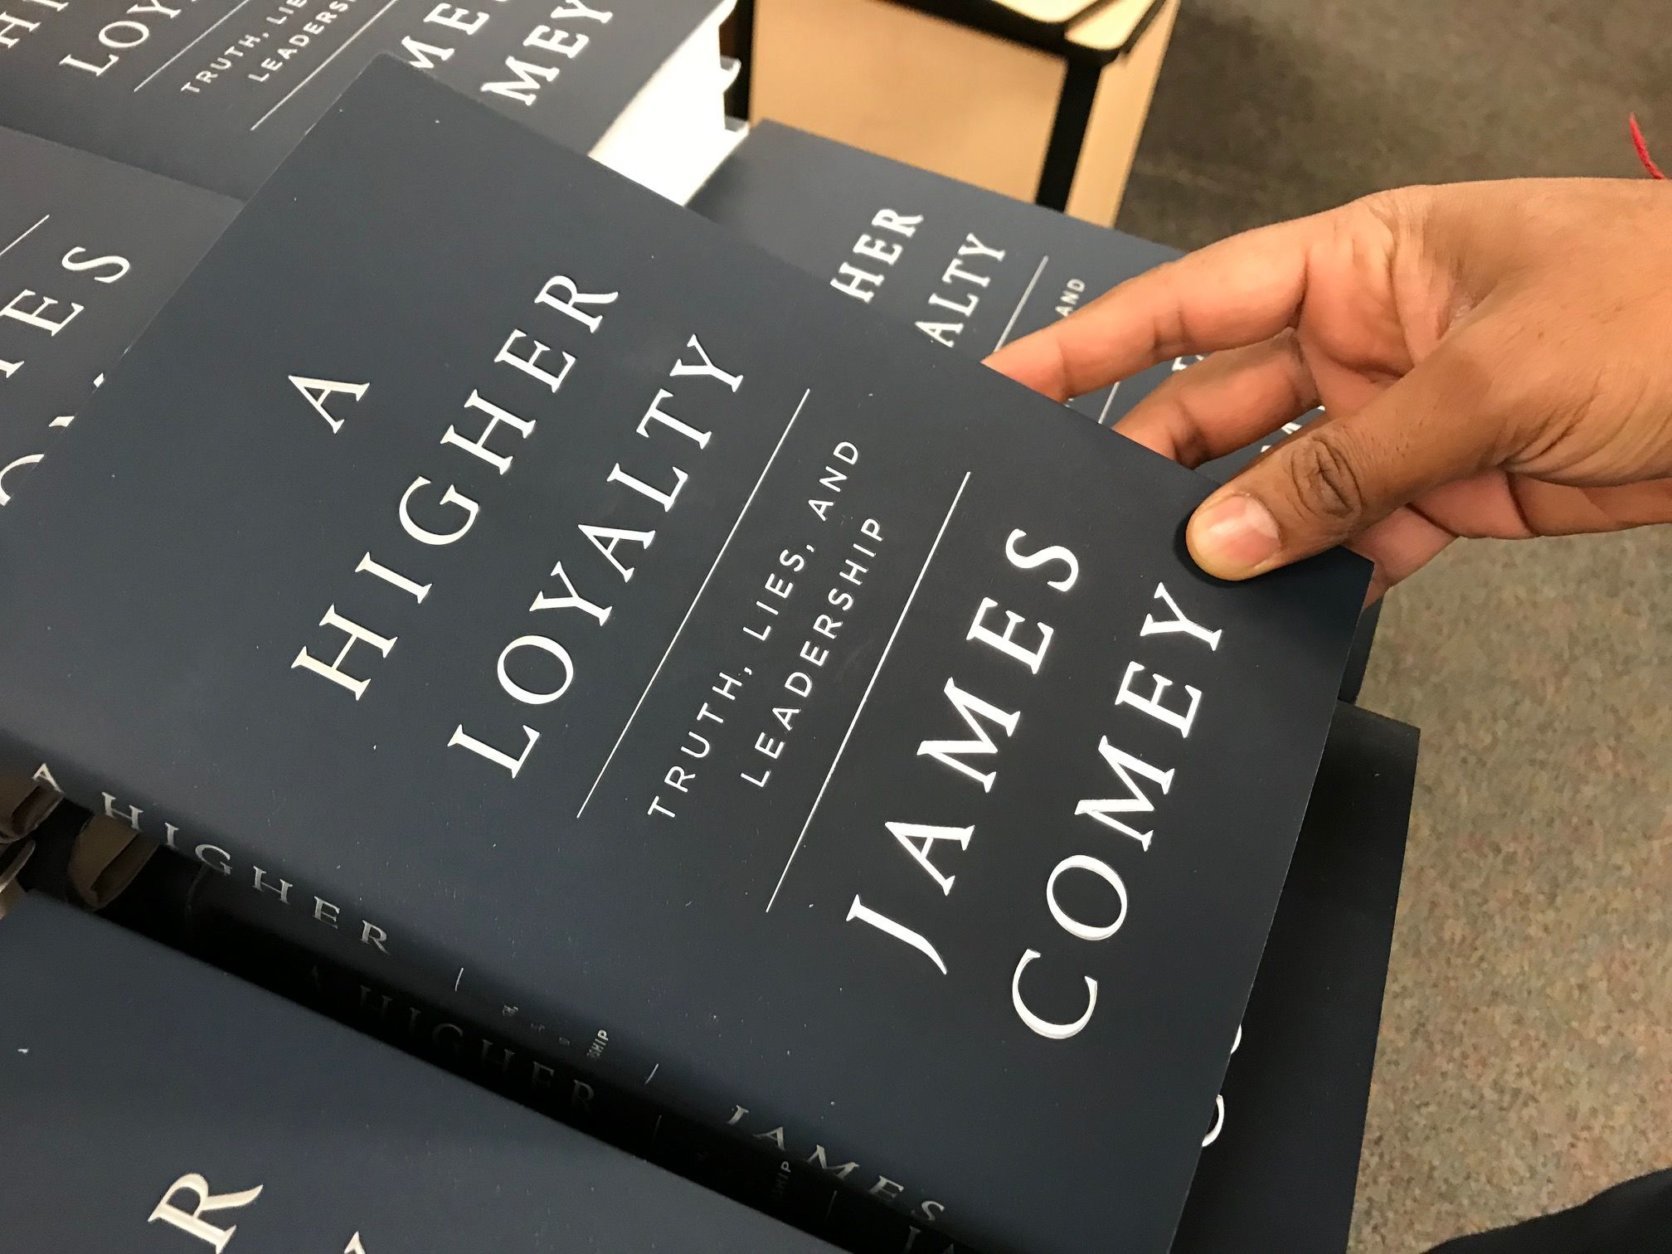 Customer Laurel Reiner said she isn’t buying the book but will read it. 'It has to do with our ethics as Americans – what are we all about as a nation?' (WTOP/Megan Cloherty)